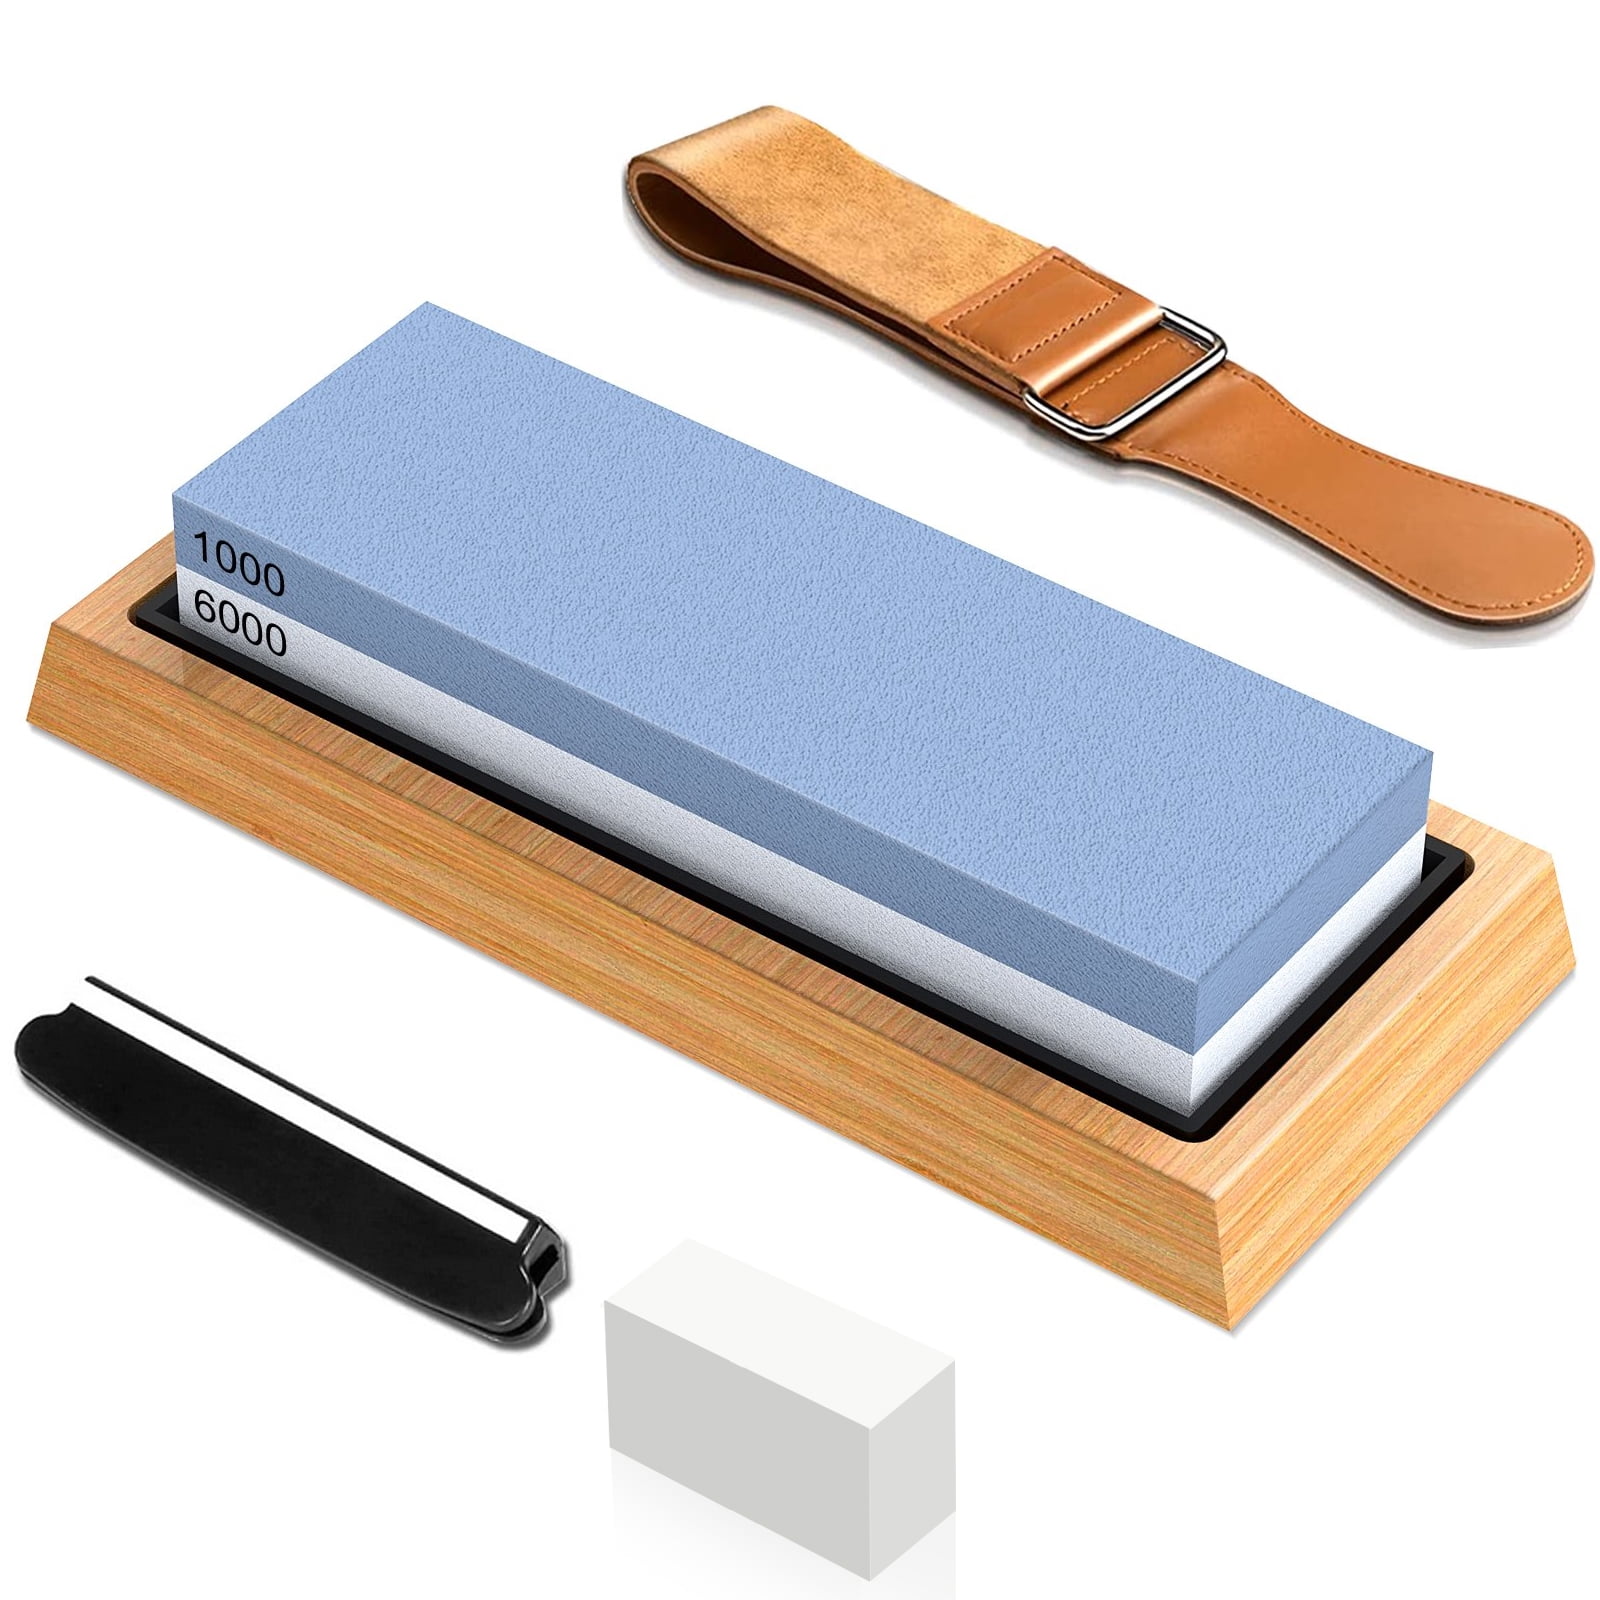 1000/6000 Dual Grit Whetstone Kit with Angle Guide & Bamboo Case